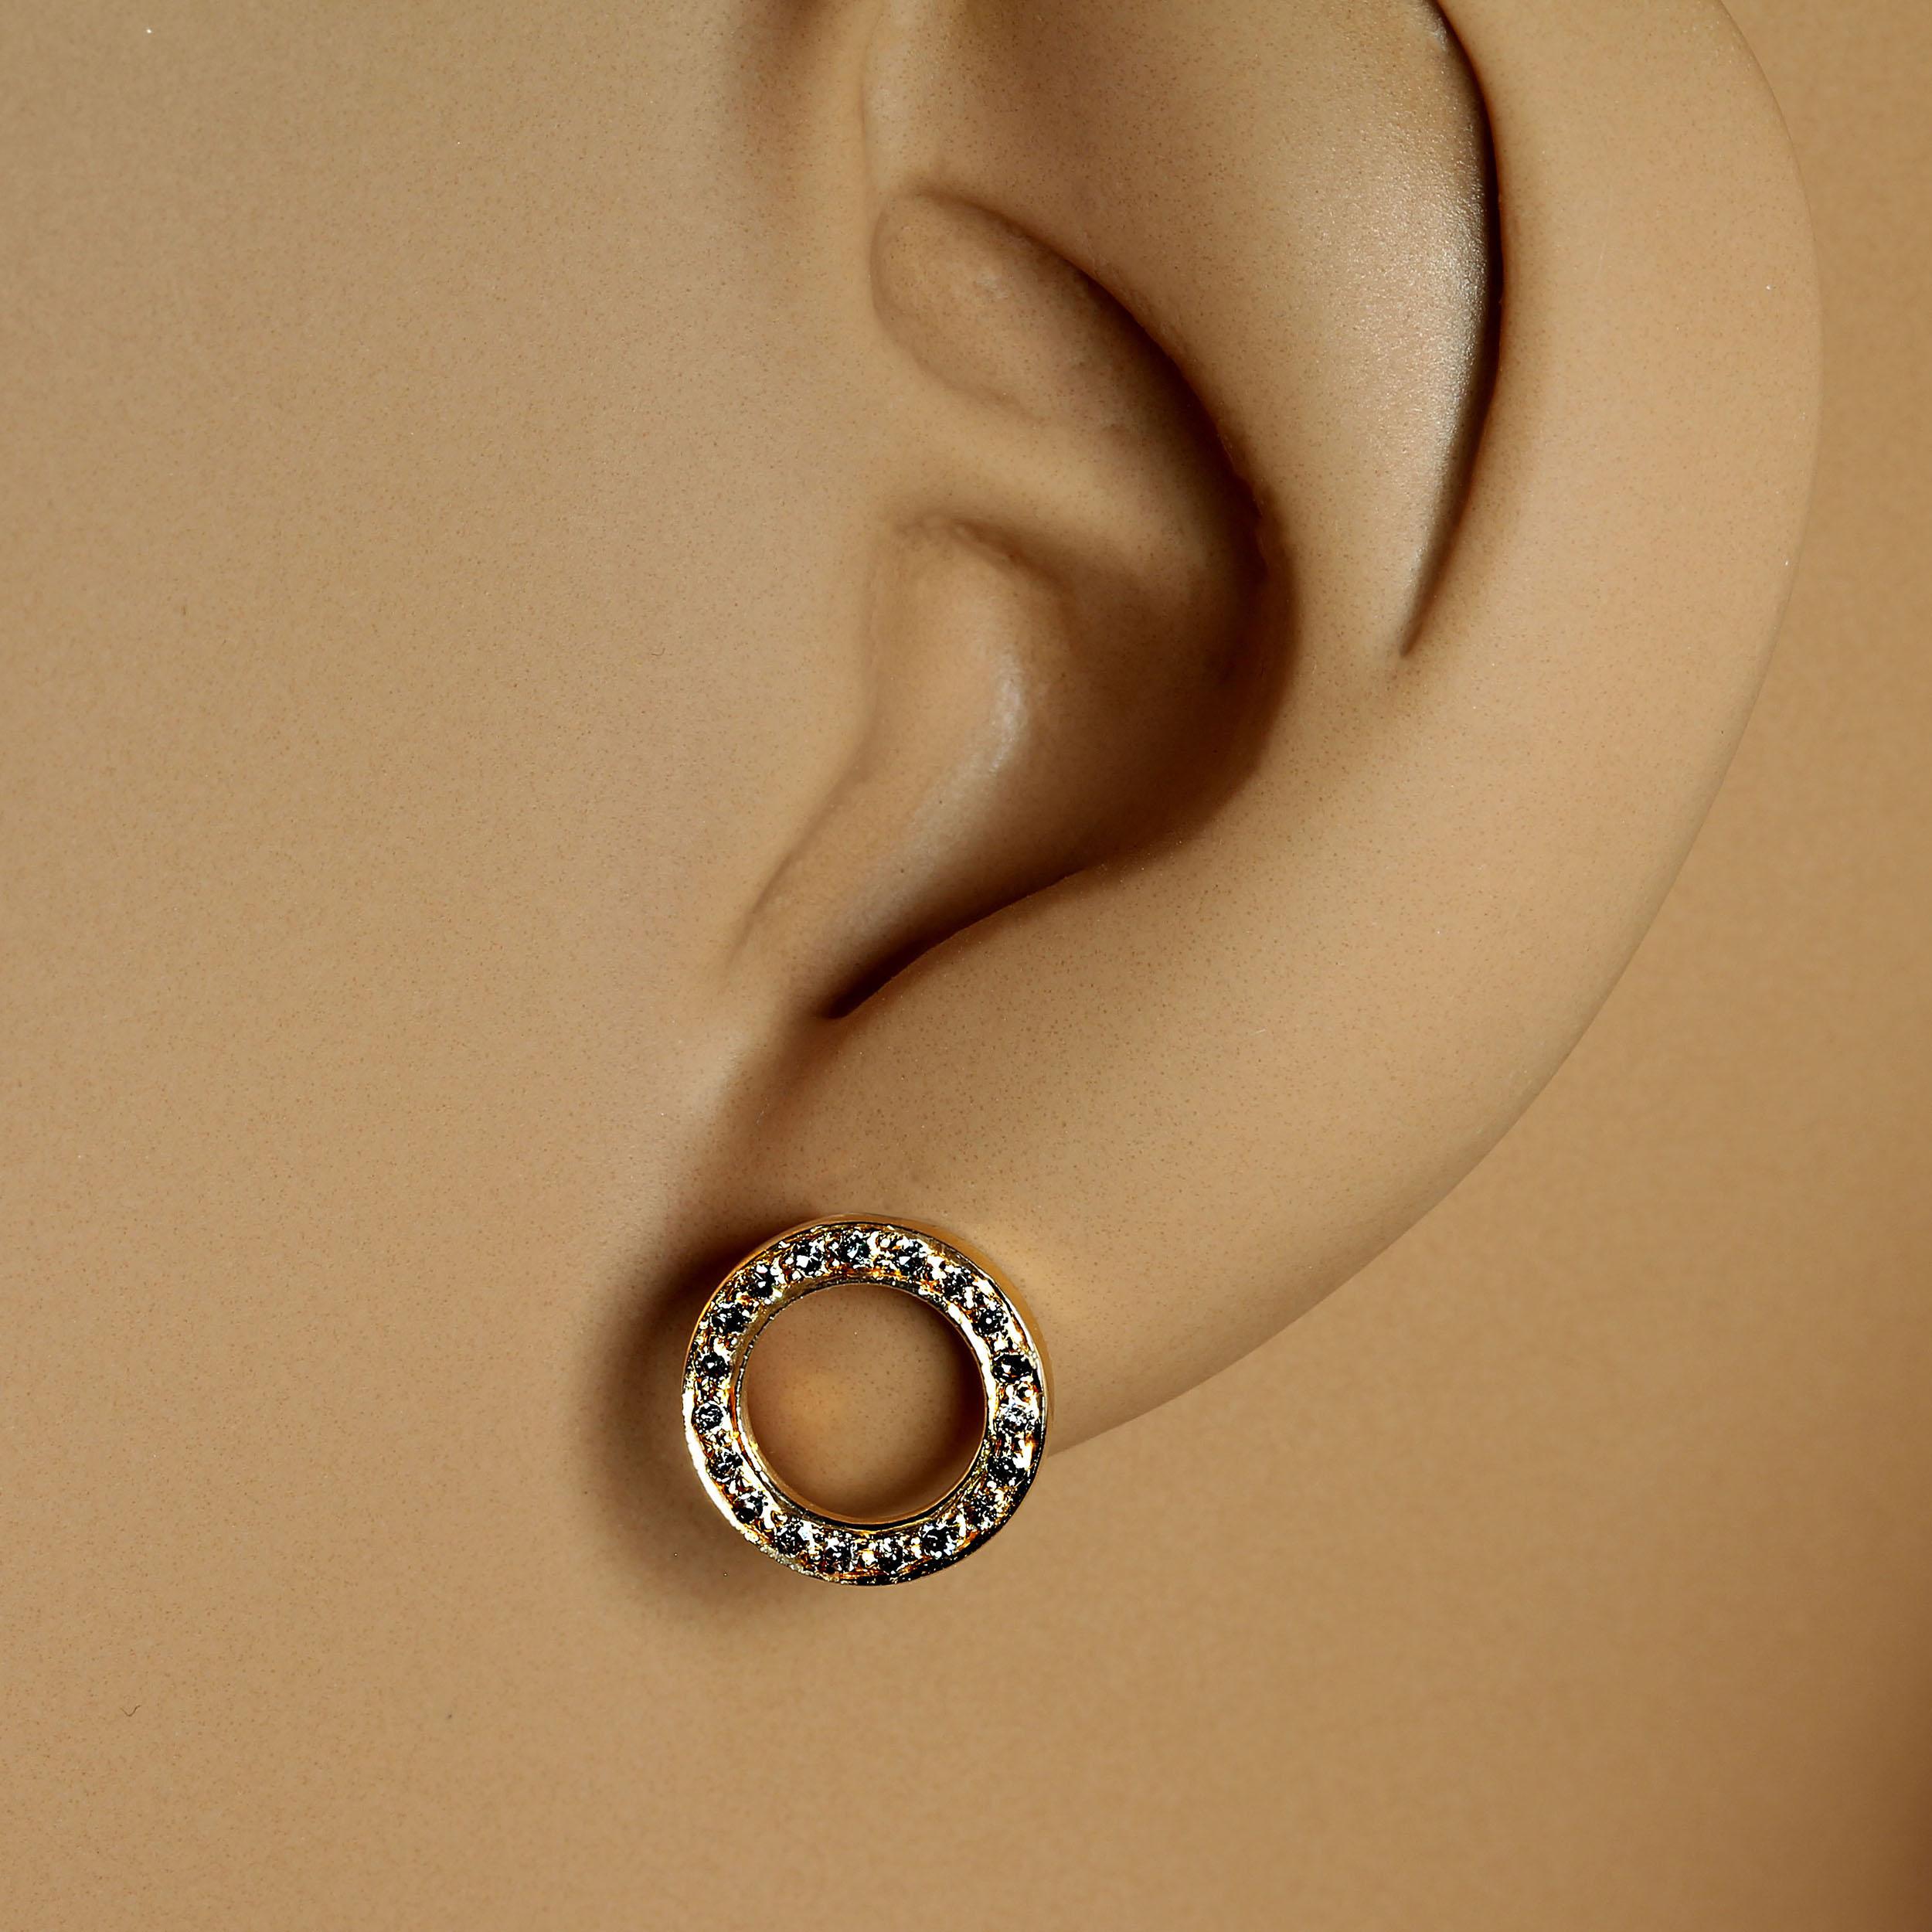 Delicate Diamond and 14KT rich yellow gold circle earrings that lie flat against the ear.  These delightful earrings feature 0.21 carats of diamonds and 1.614 grams of 14KT gold. These earrings are perfect for anyone who's piercings are not quite